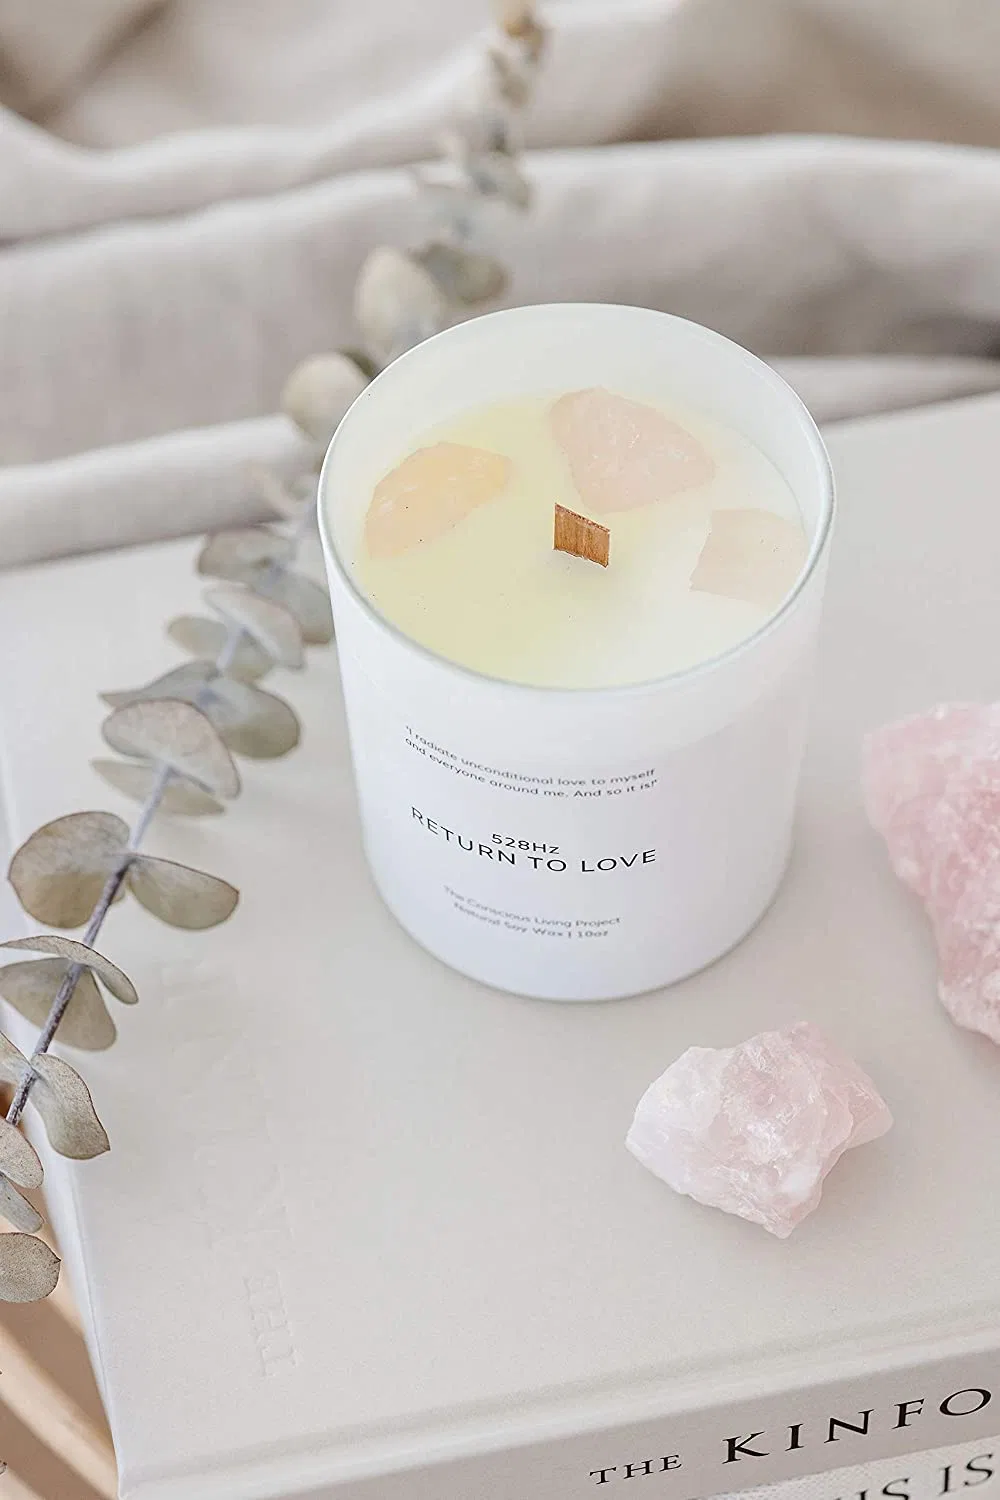 Heart Chakra Crystal Candle for Love Healing Cleansing Manifesting Soy Wax Luxury Candle